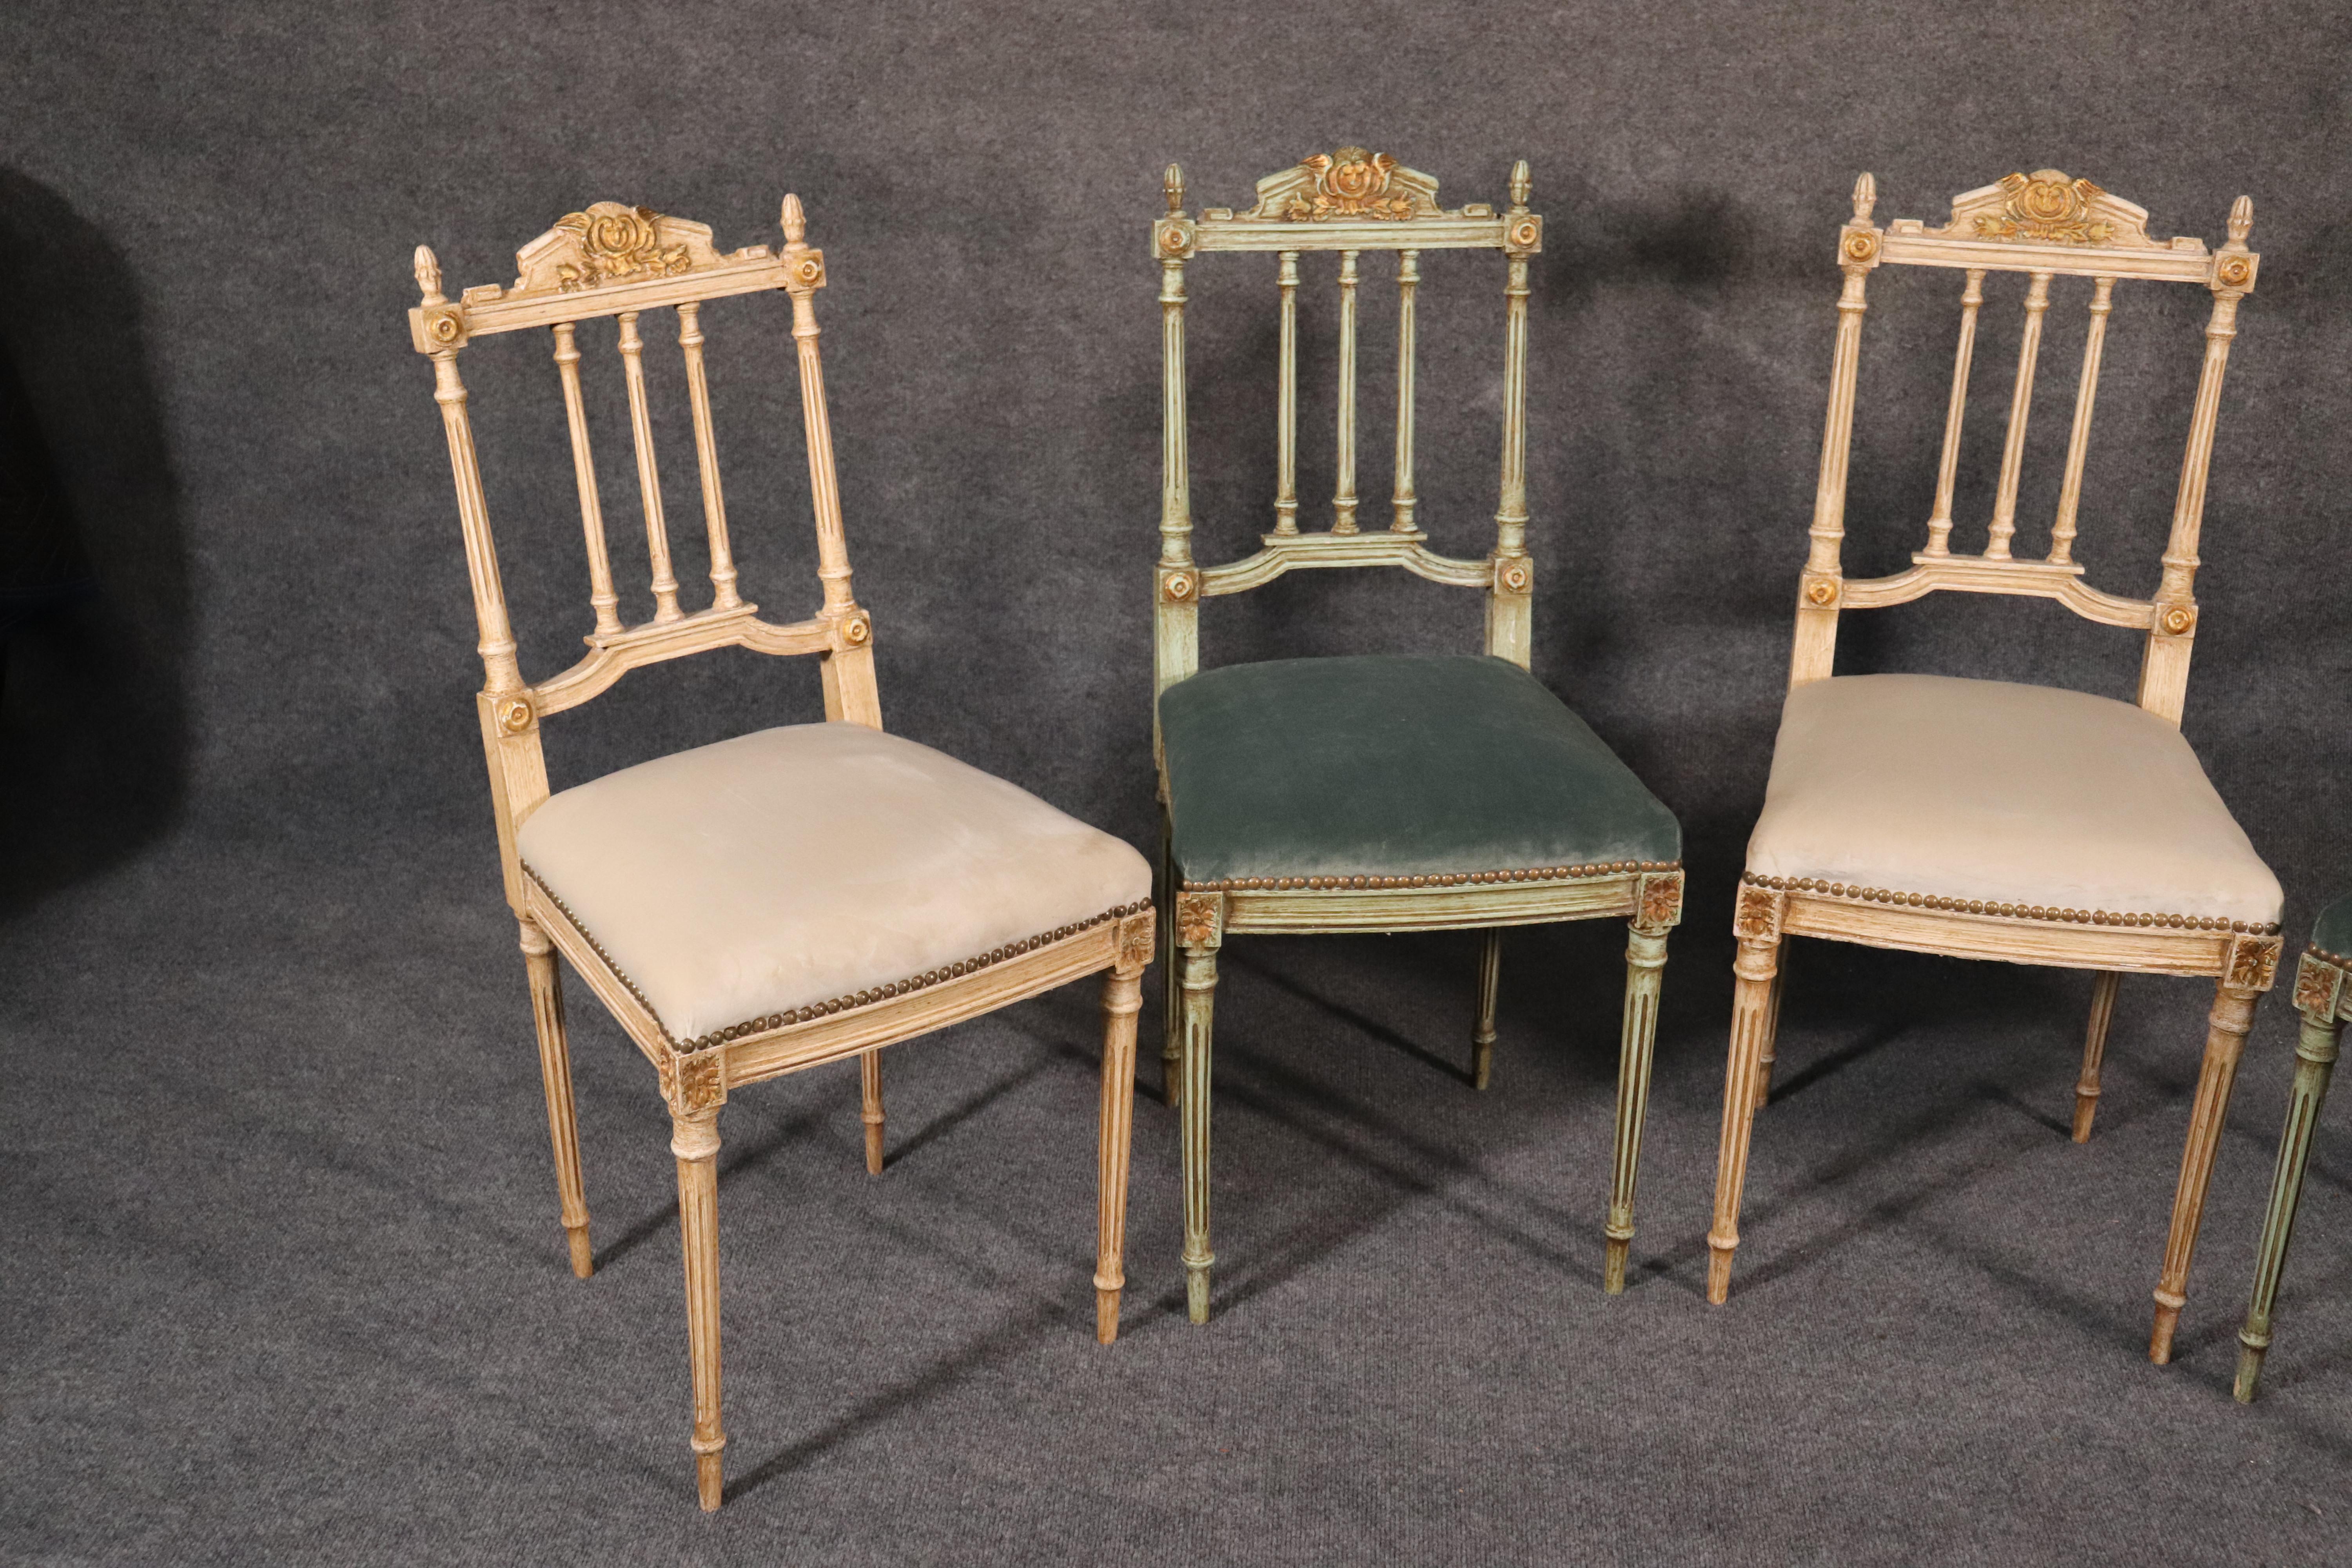 This is a fine set of beautifully painted and gilded carved chairs. They are perfect for use as parlor chairs or as vanity or occasional chairs, circa 1890s. They are in excellent condition with beautiful chenille upholstery. The colors of crème and